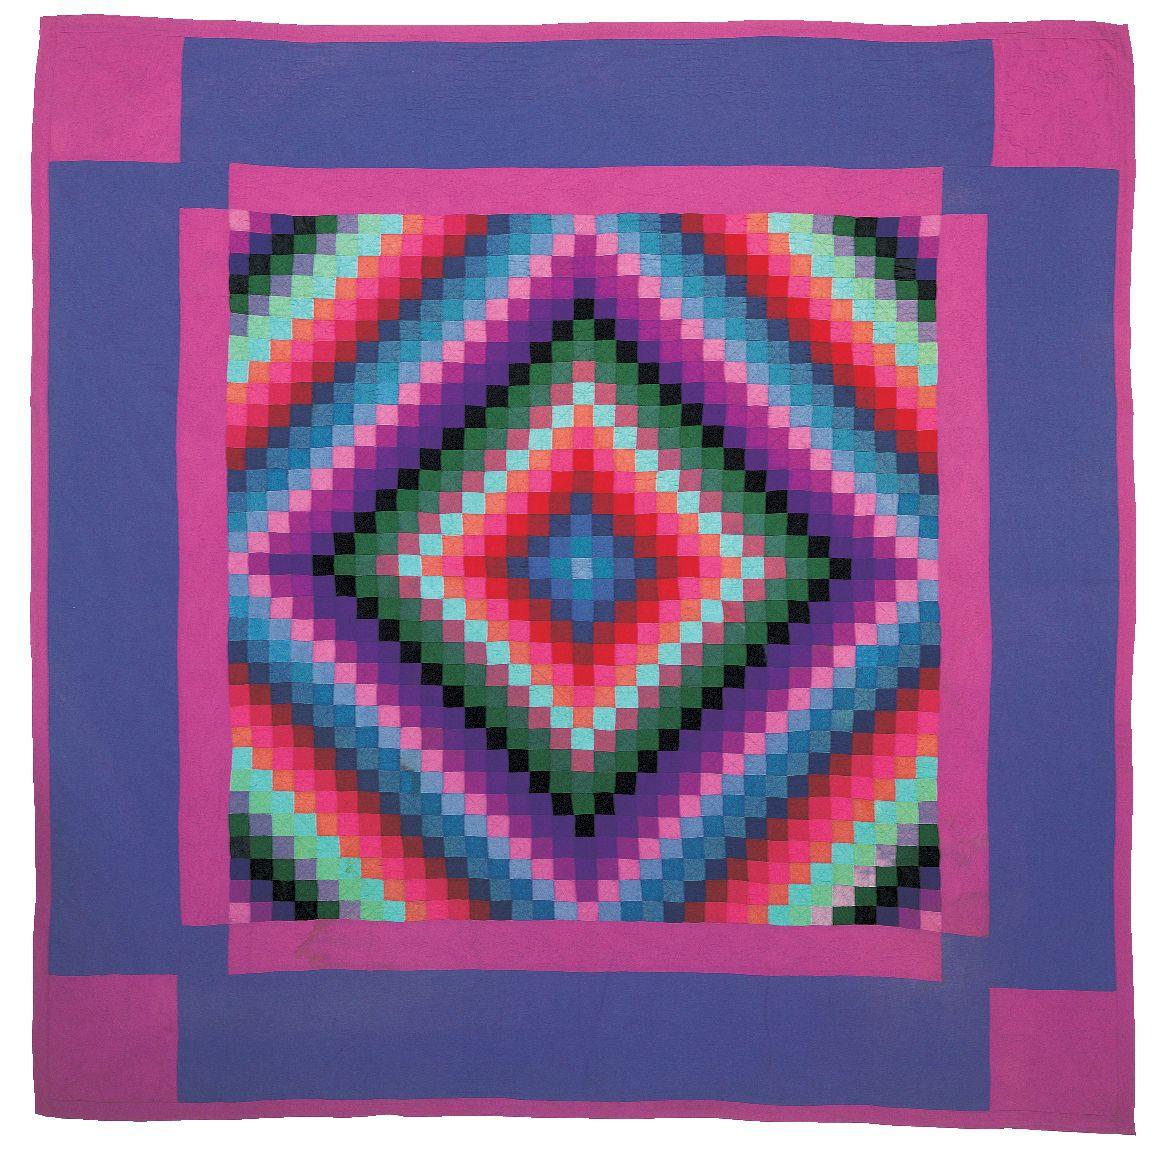 A quilt with a diamond center and a border in purple and pink colors.